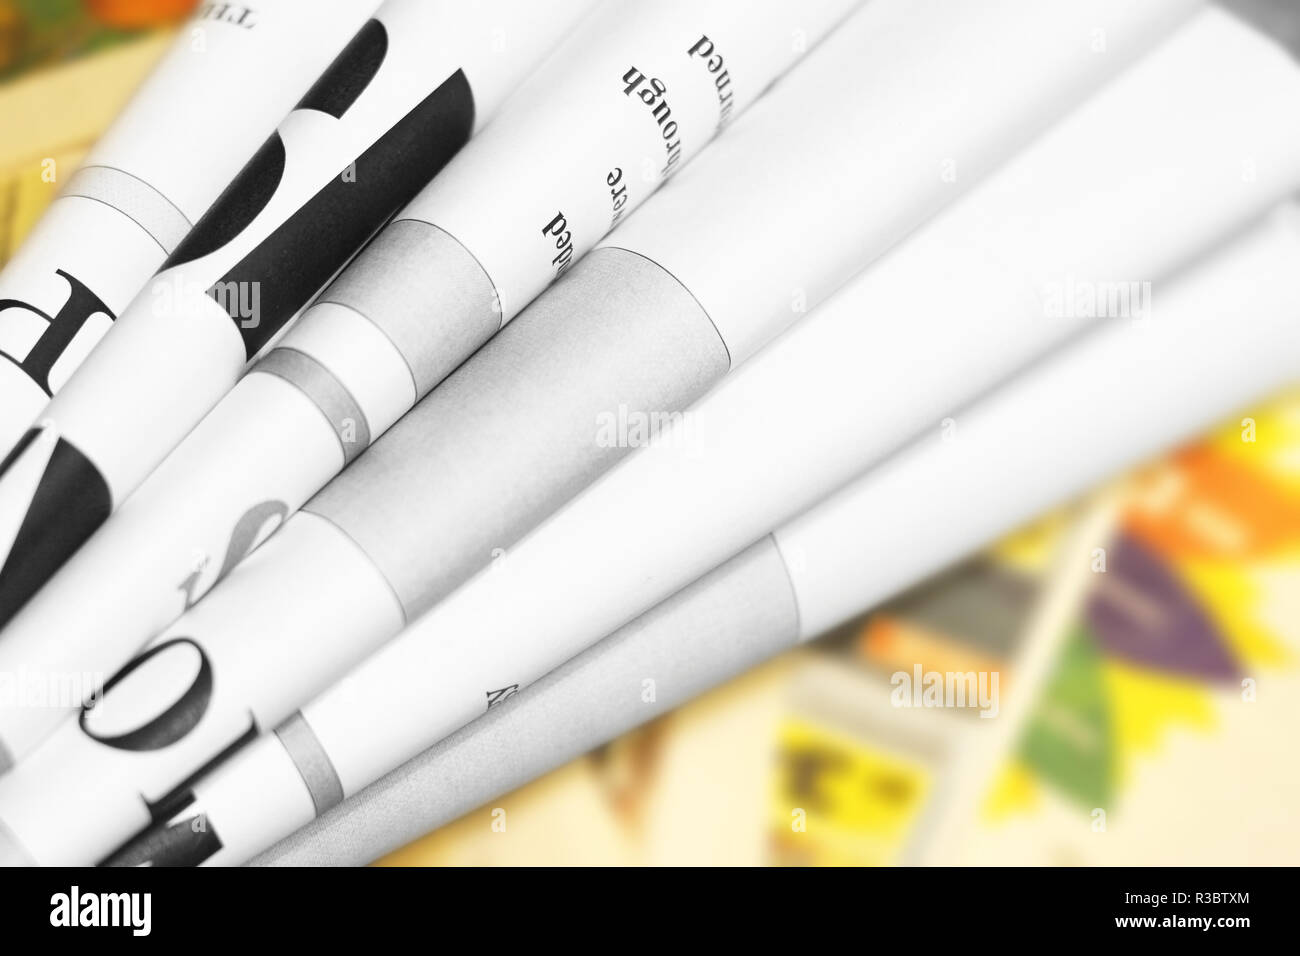 Folded newspapers with partially visible headlines and pages with articles - blurred text and photos. Papers with news, business and finance journals Stock Photo